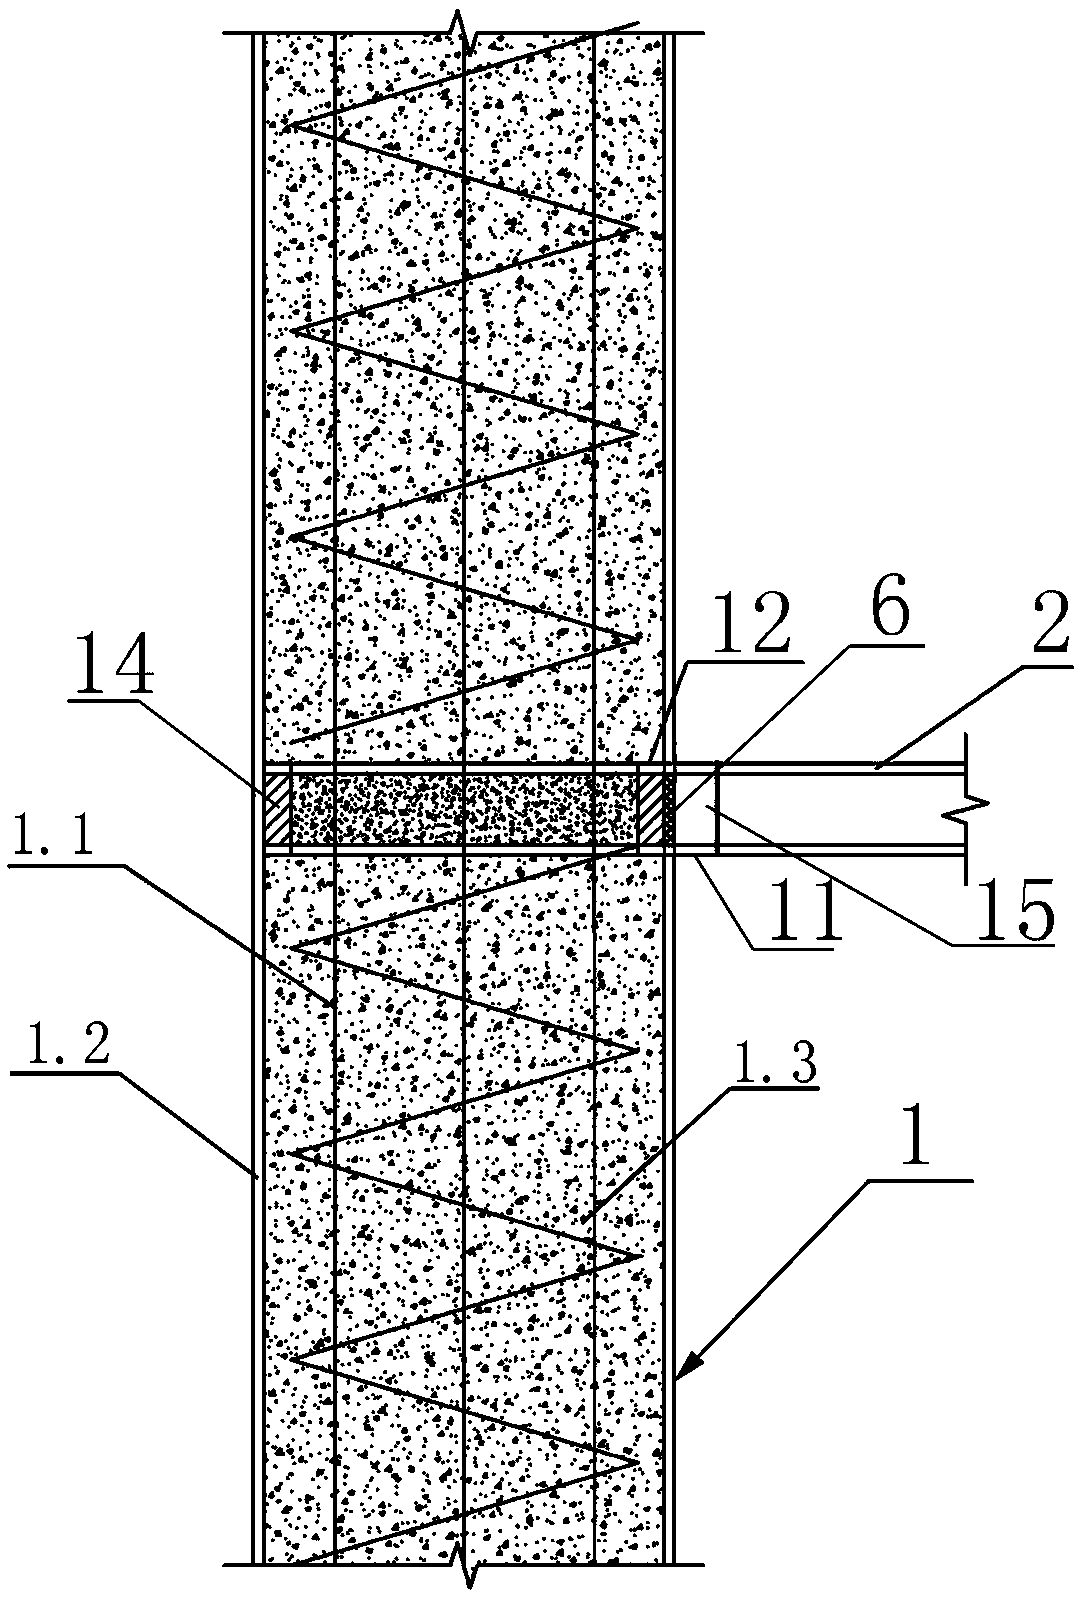 Reinforced cold-bent concrete-filled steel tube column, structure system and construction method